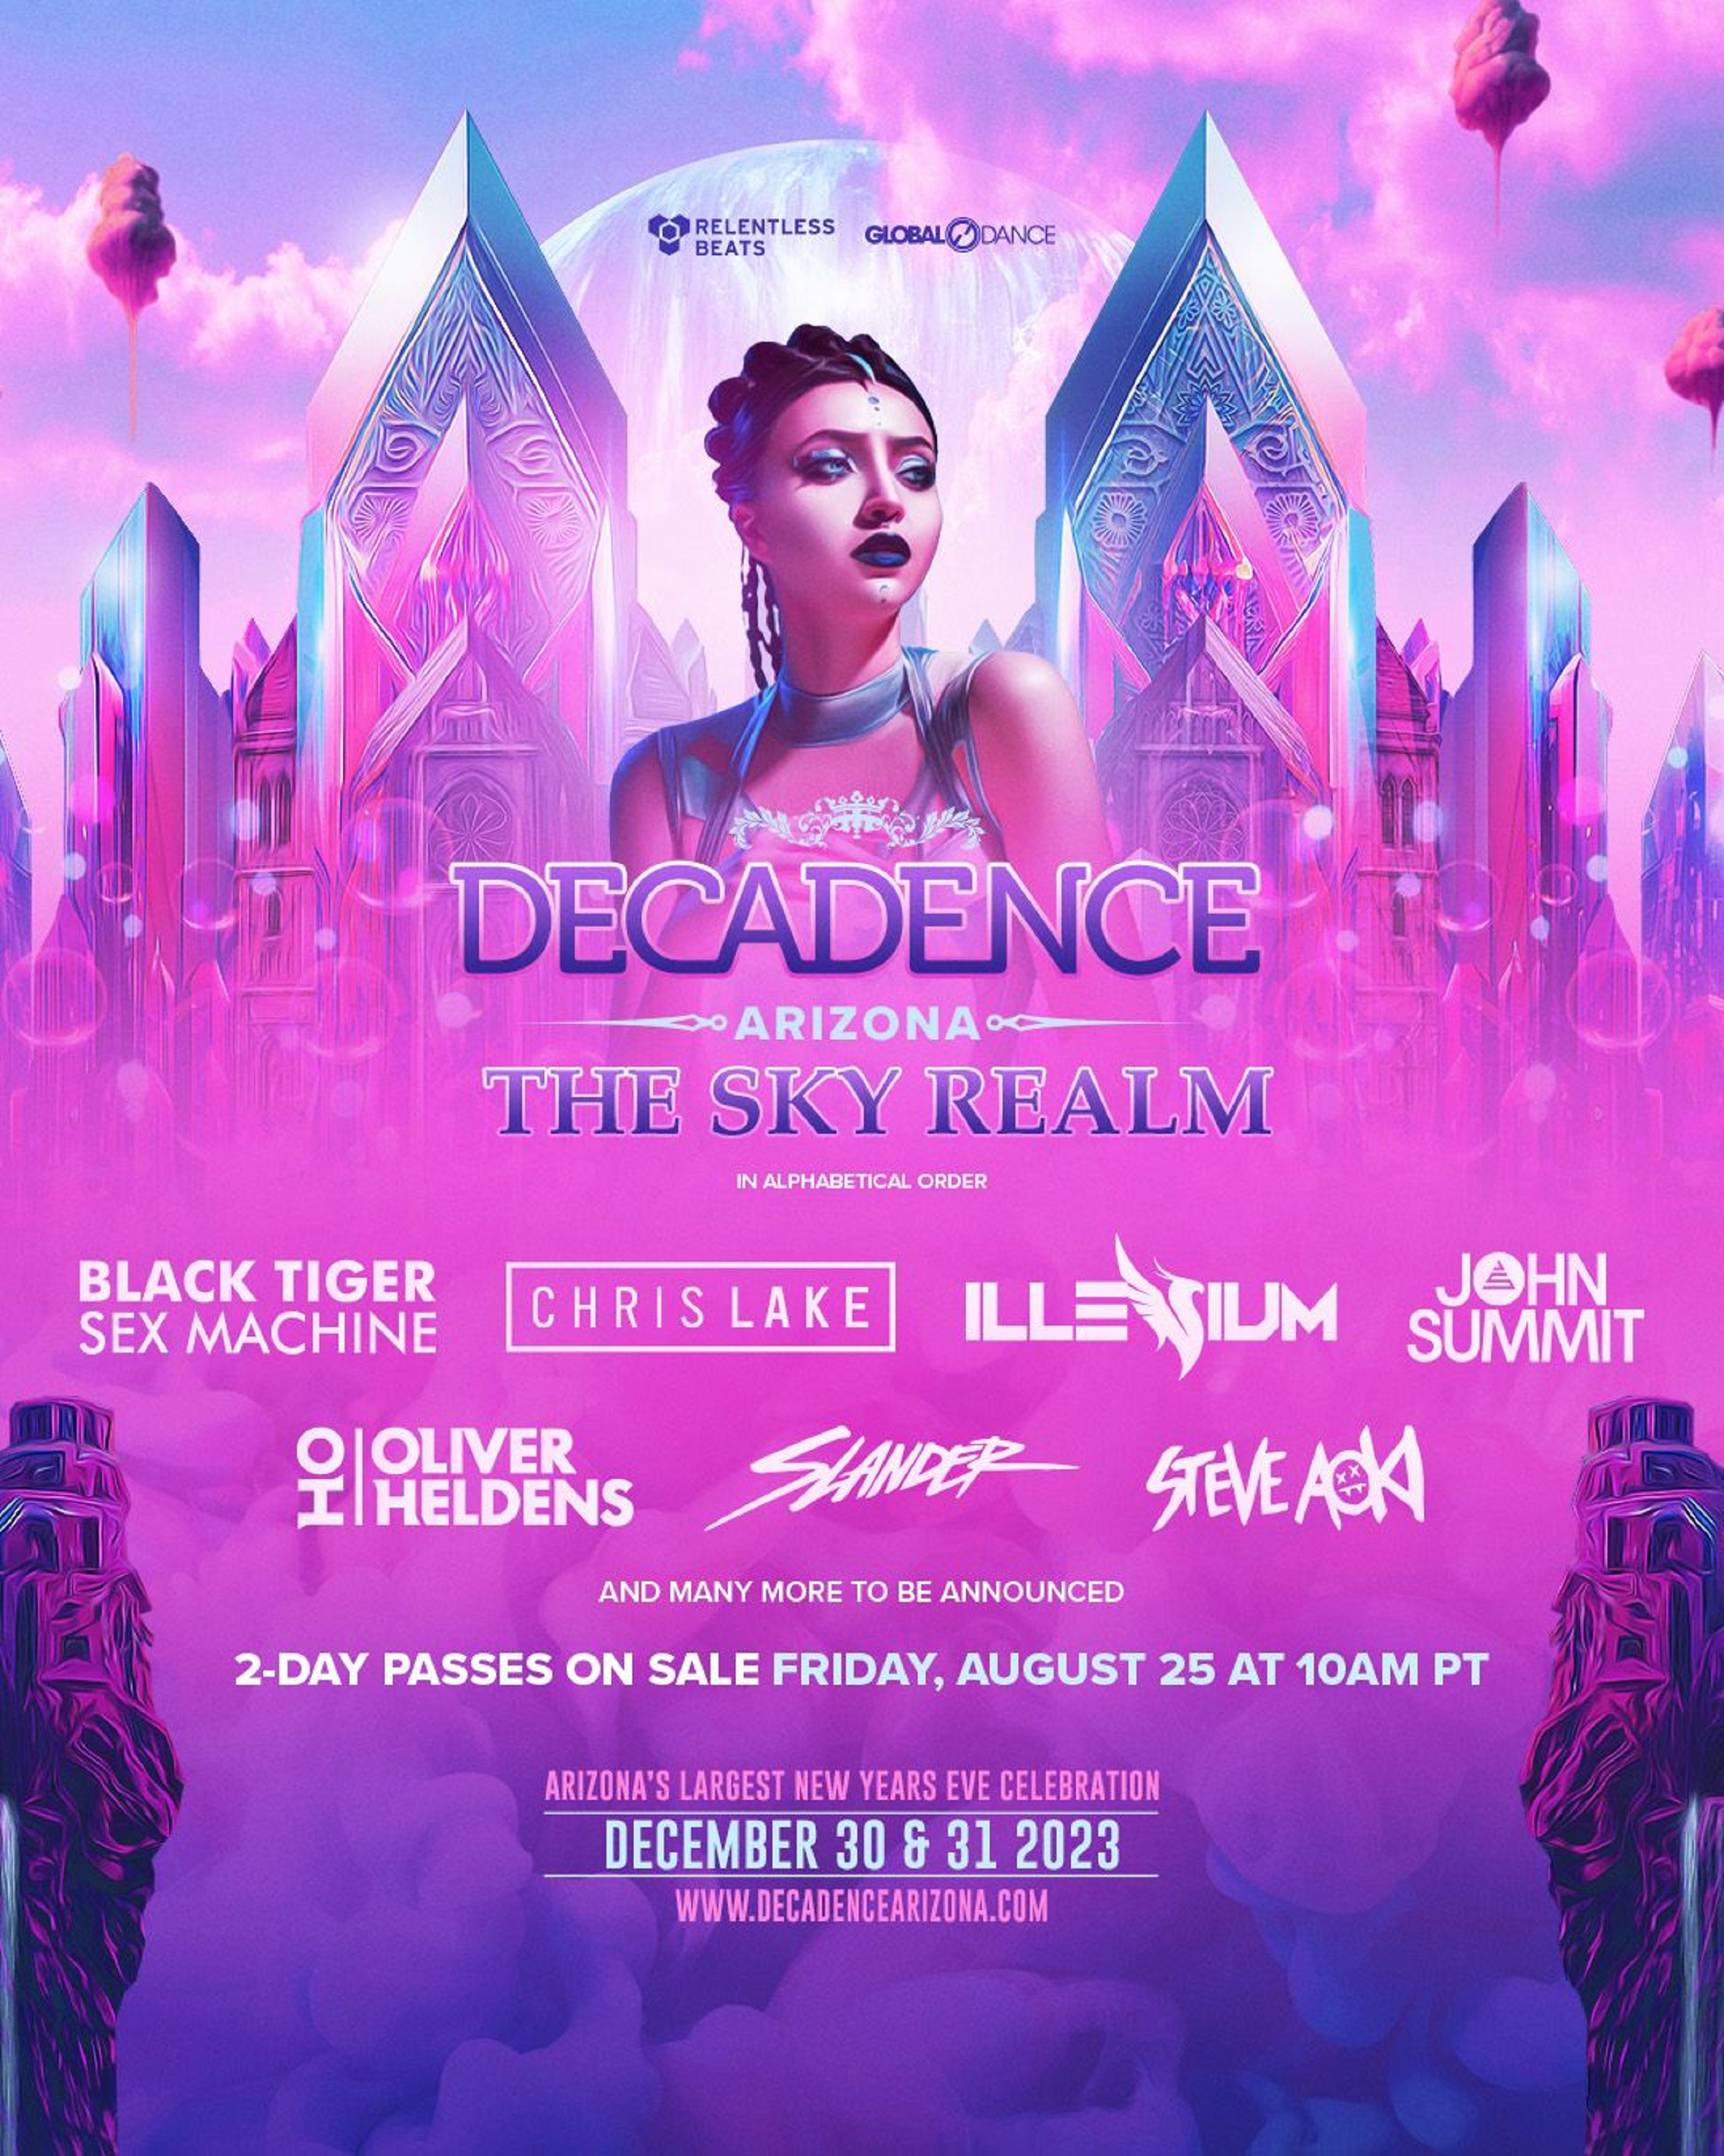 RELENTLESS BEATS PUSHES THE LIMIT WITH DECADENCE ARIZONA: THE SKY REALM PHASE 01 LINEUP ANNOUNCEMENT